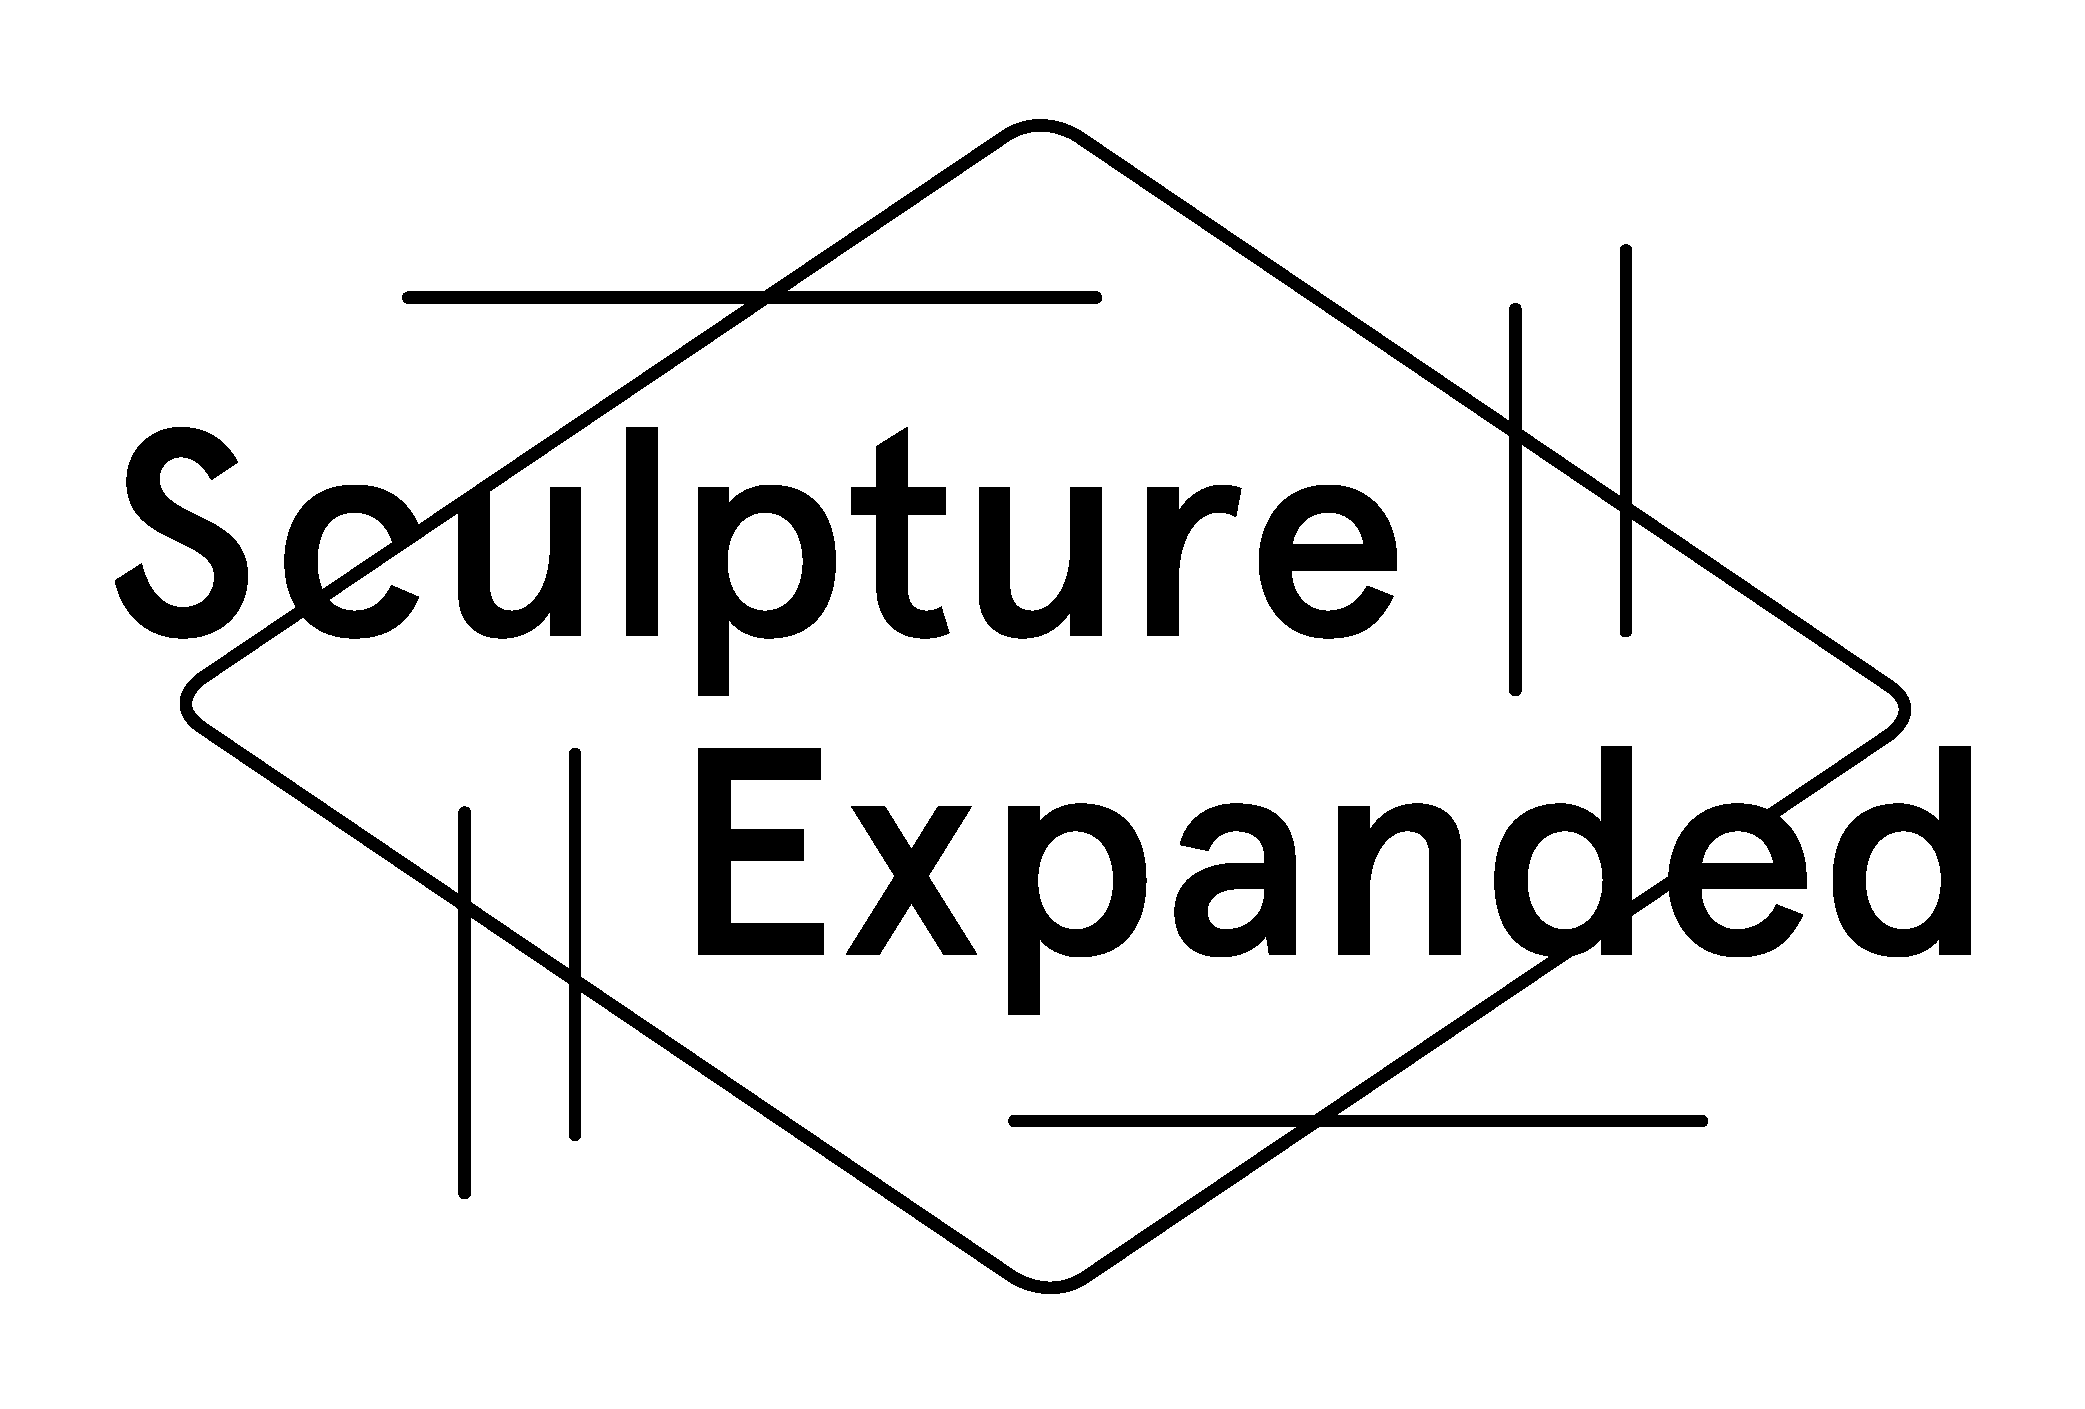 Sculpture Expanded